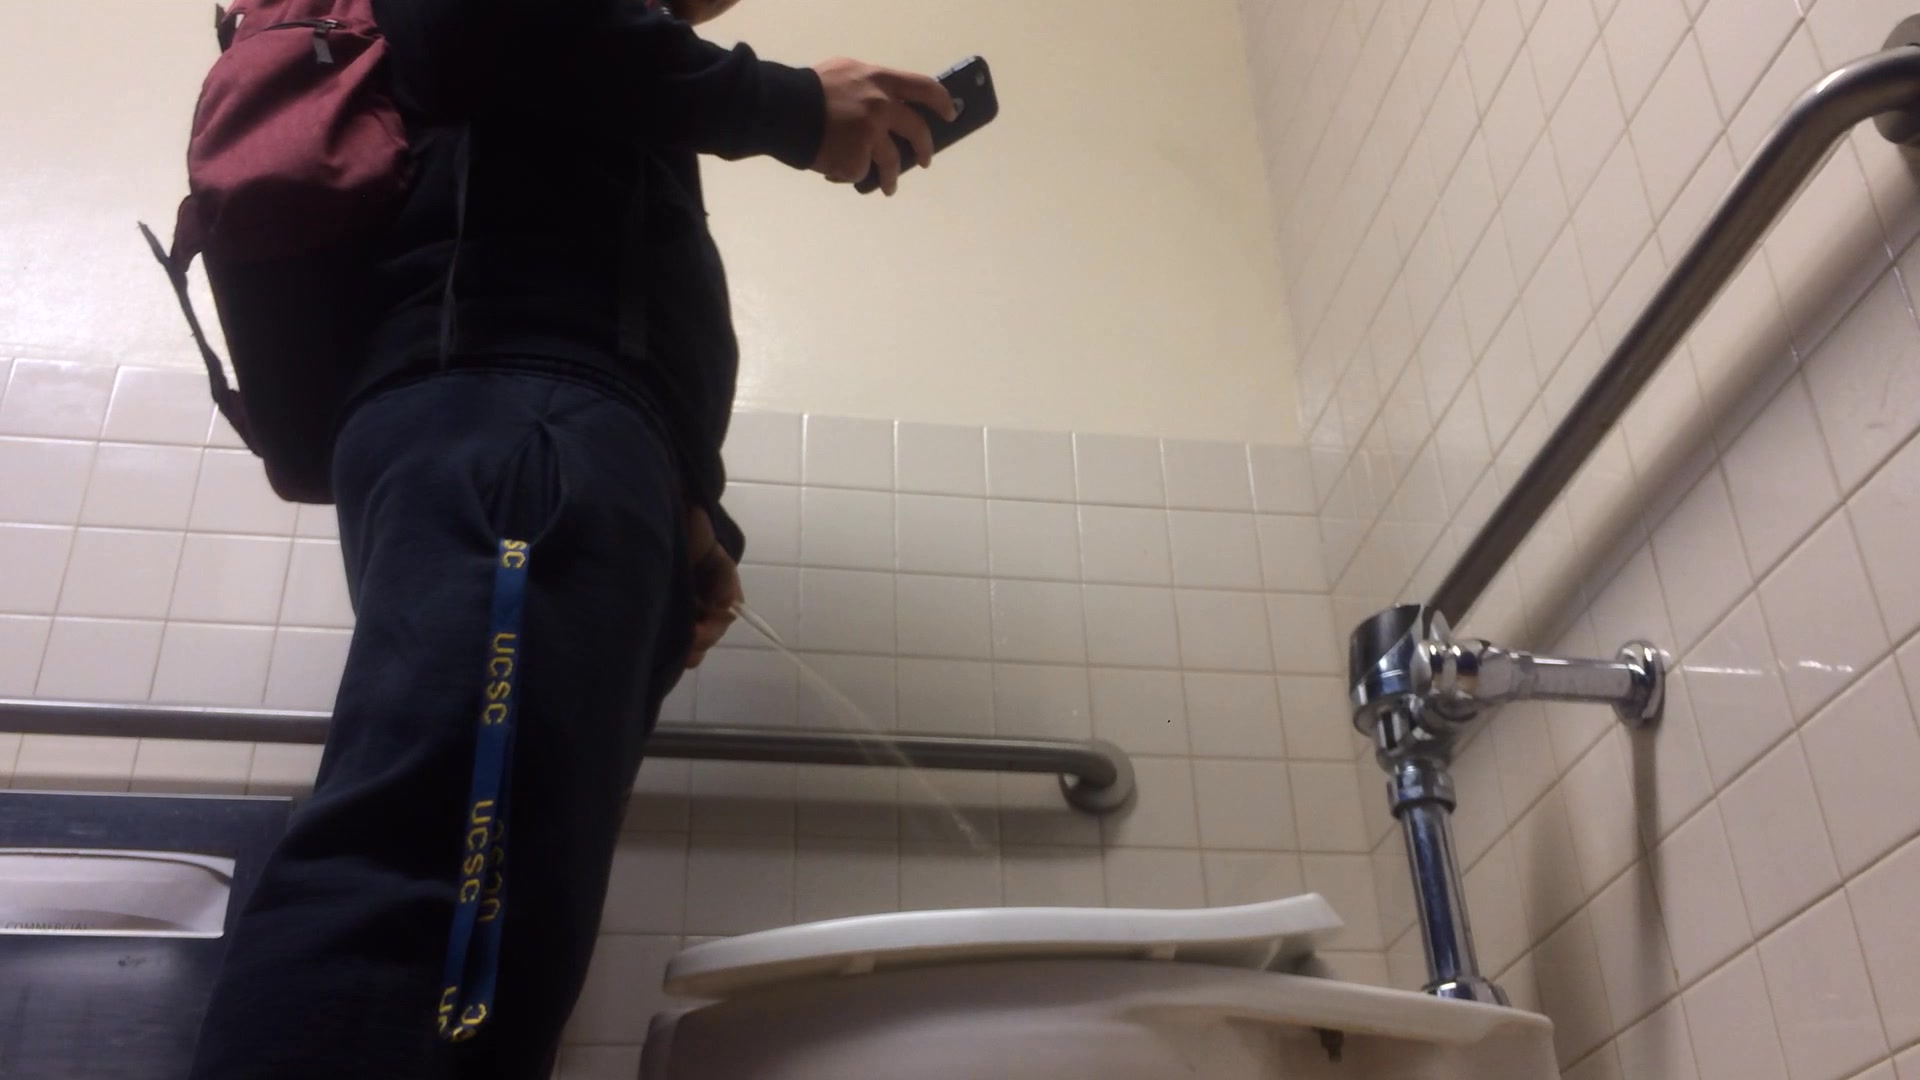 student pissing & texting